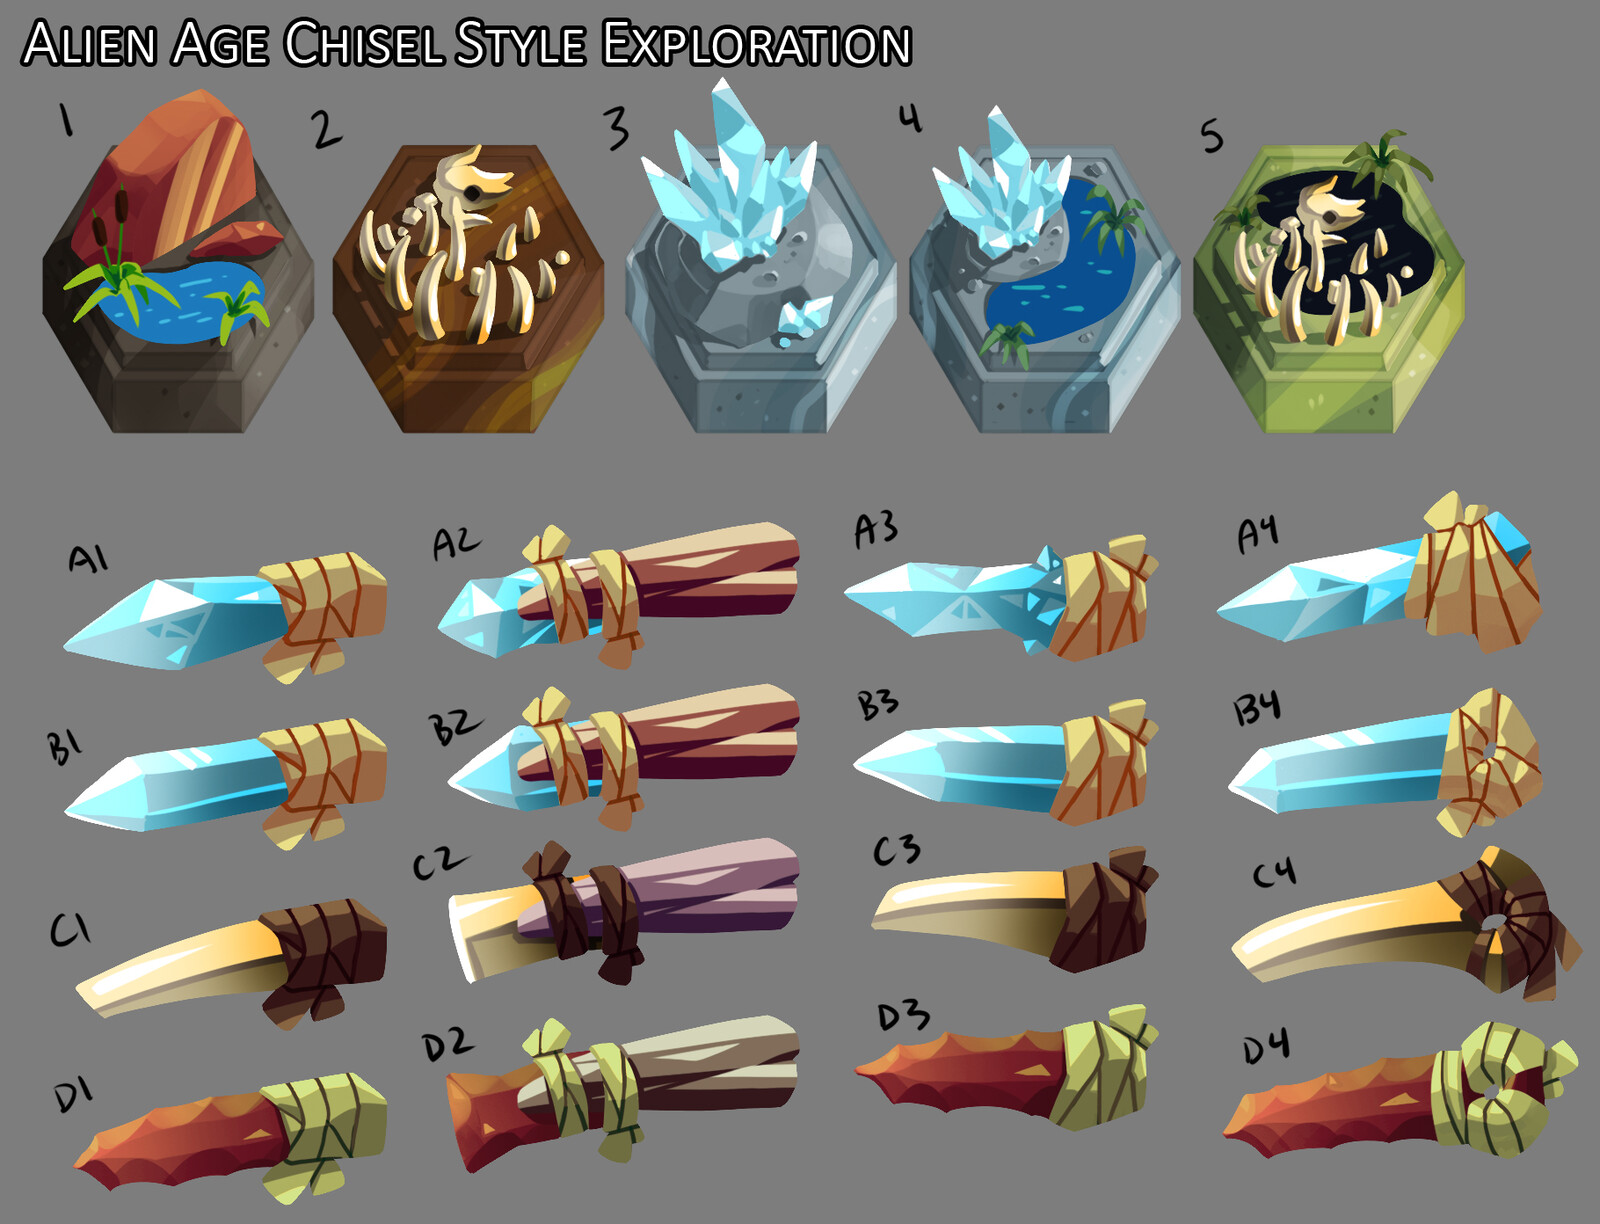 Chisel concept, which later became "crystal". Ended up using #3 as the crystal tile.